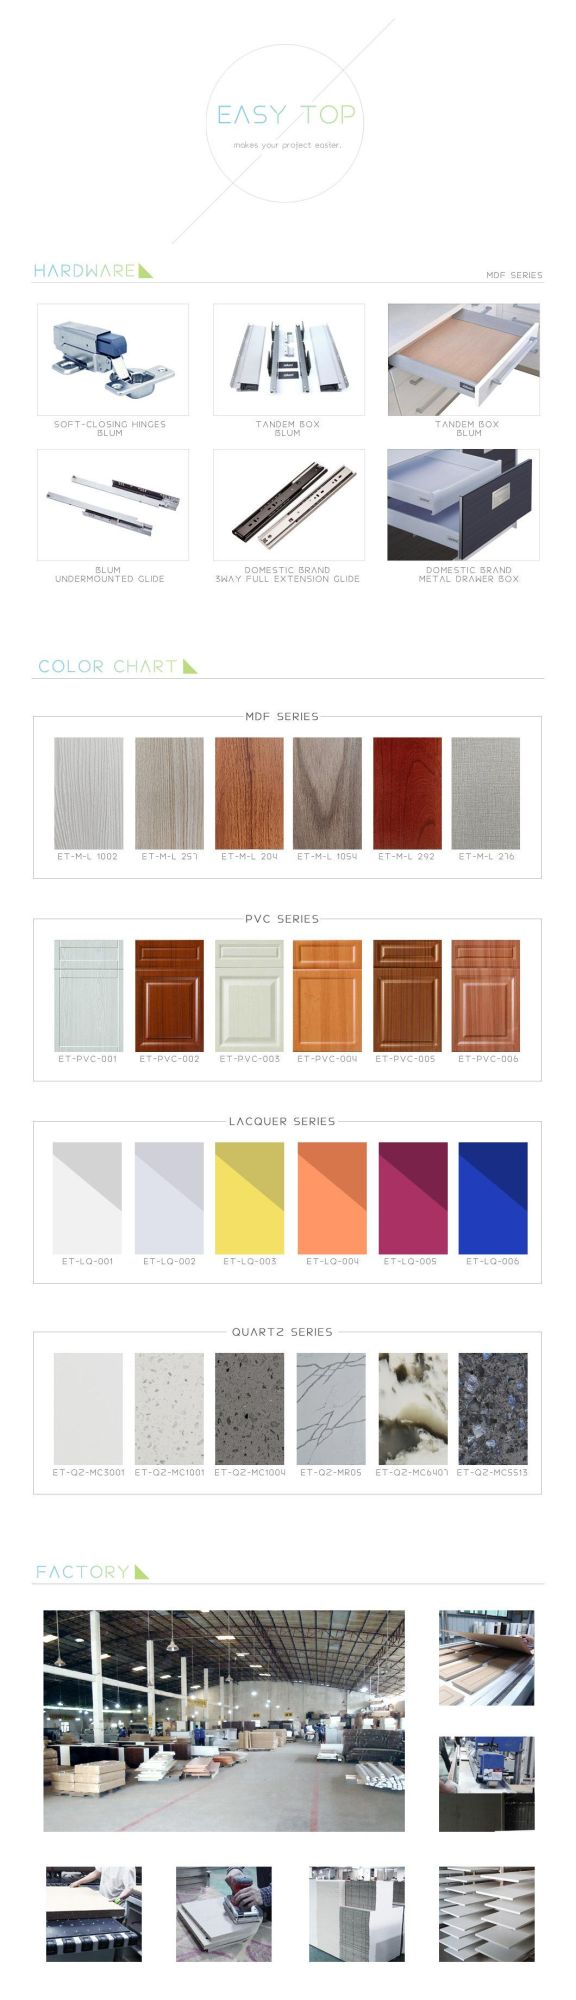 High Quality Home Storage Cabinets Gery Matt Kitchen Pantry Wooden Cupboard Home Furniture